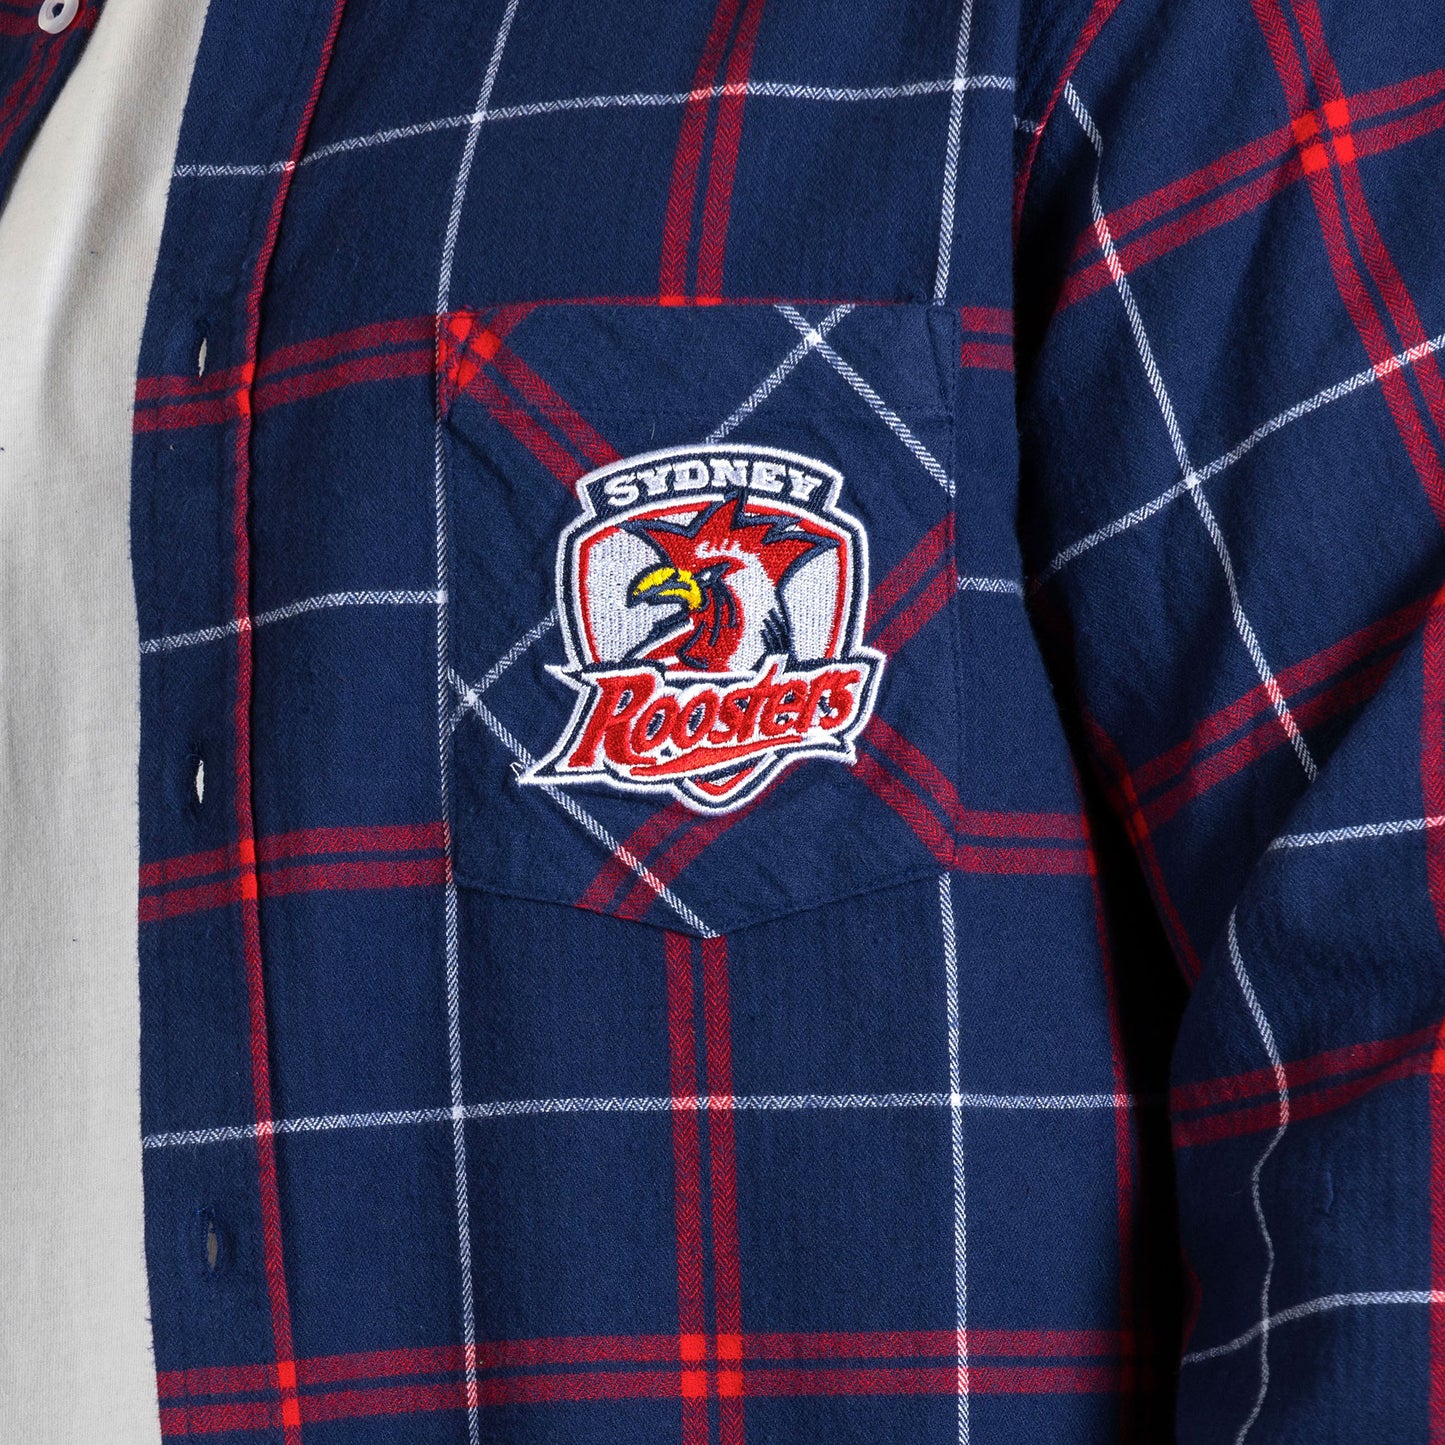 Sydney Roosters Mustang Flannel Shirts